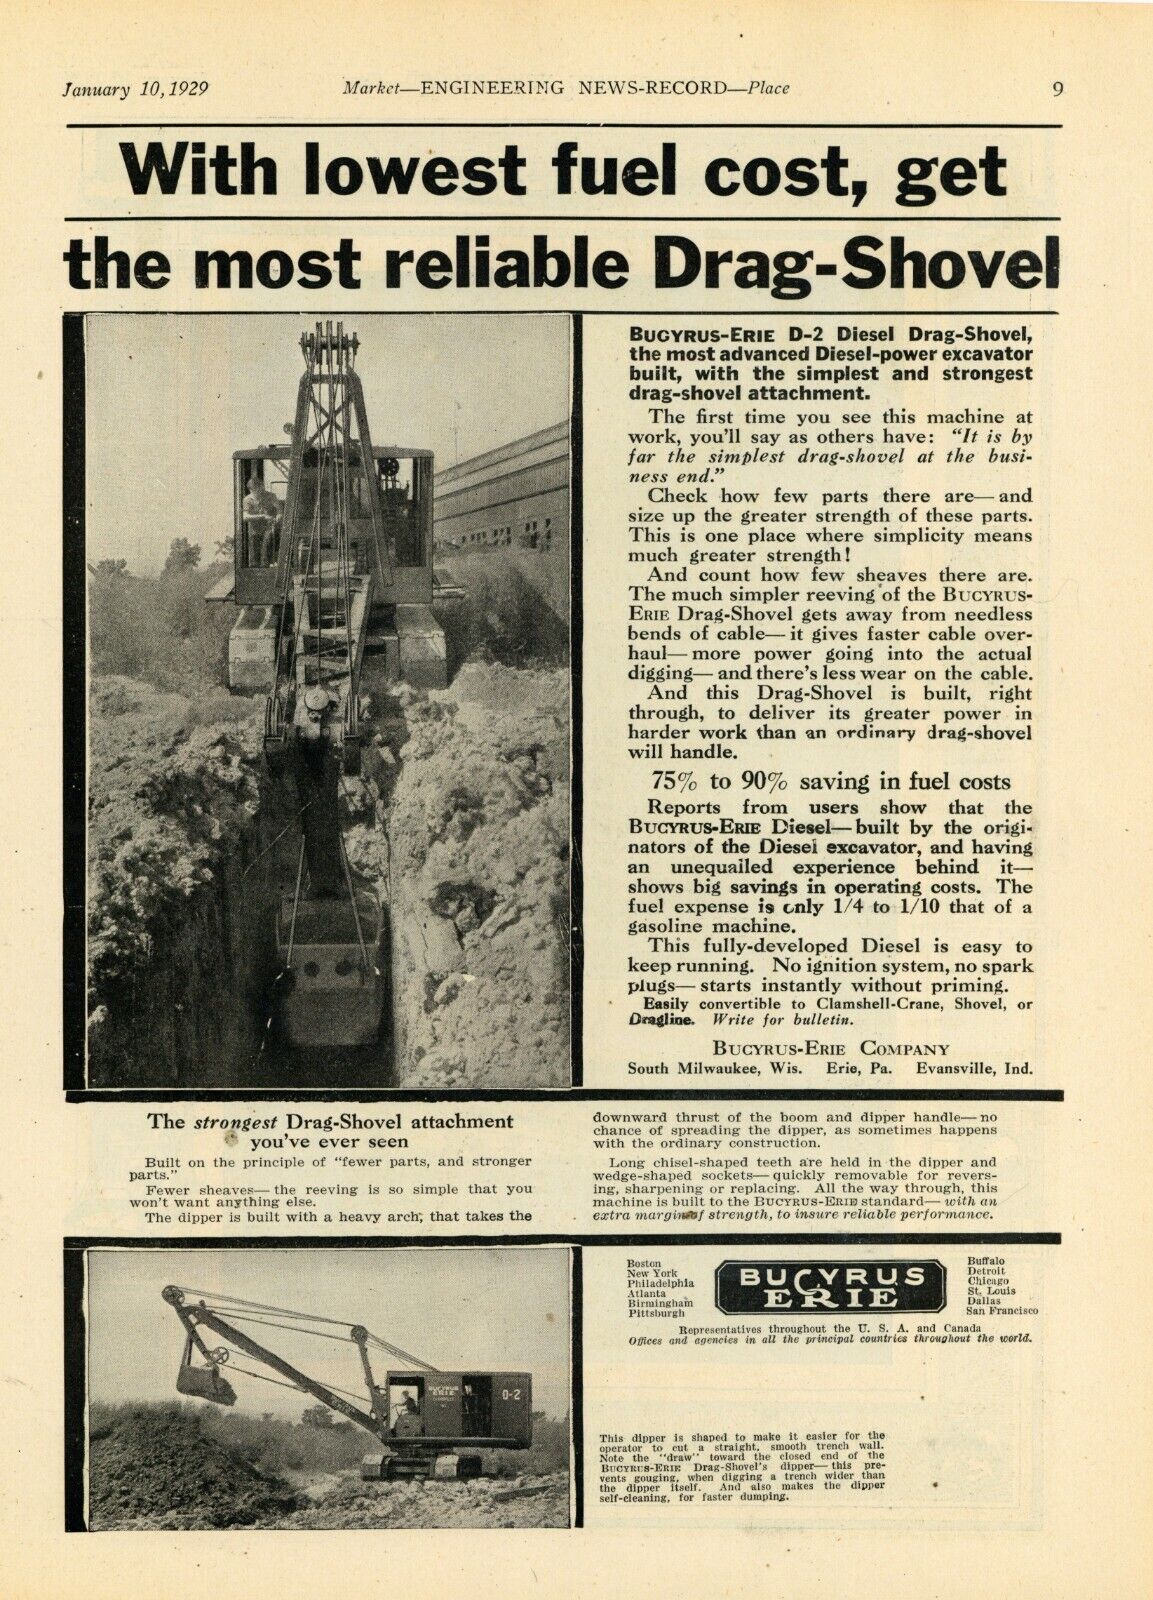 1929 Bucyrus Erie Ad: Model D-2 Drag Shovel Pictured on the Job S. Milwaukee, WI